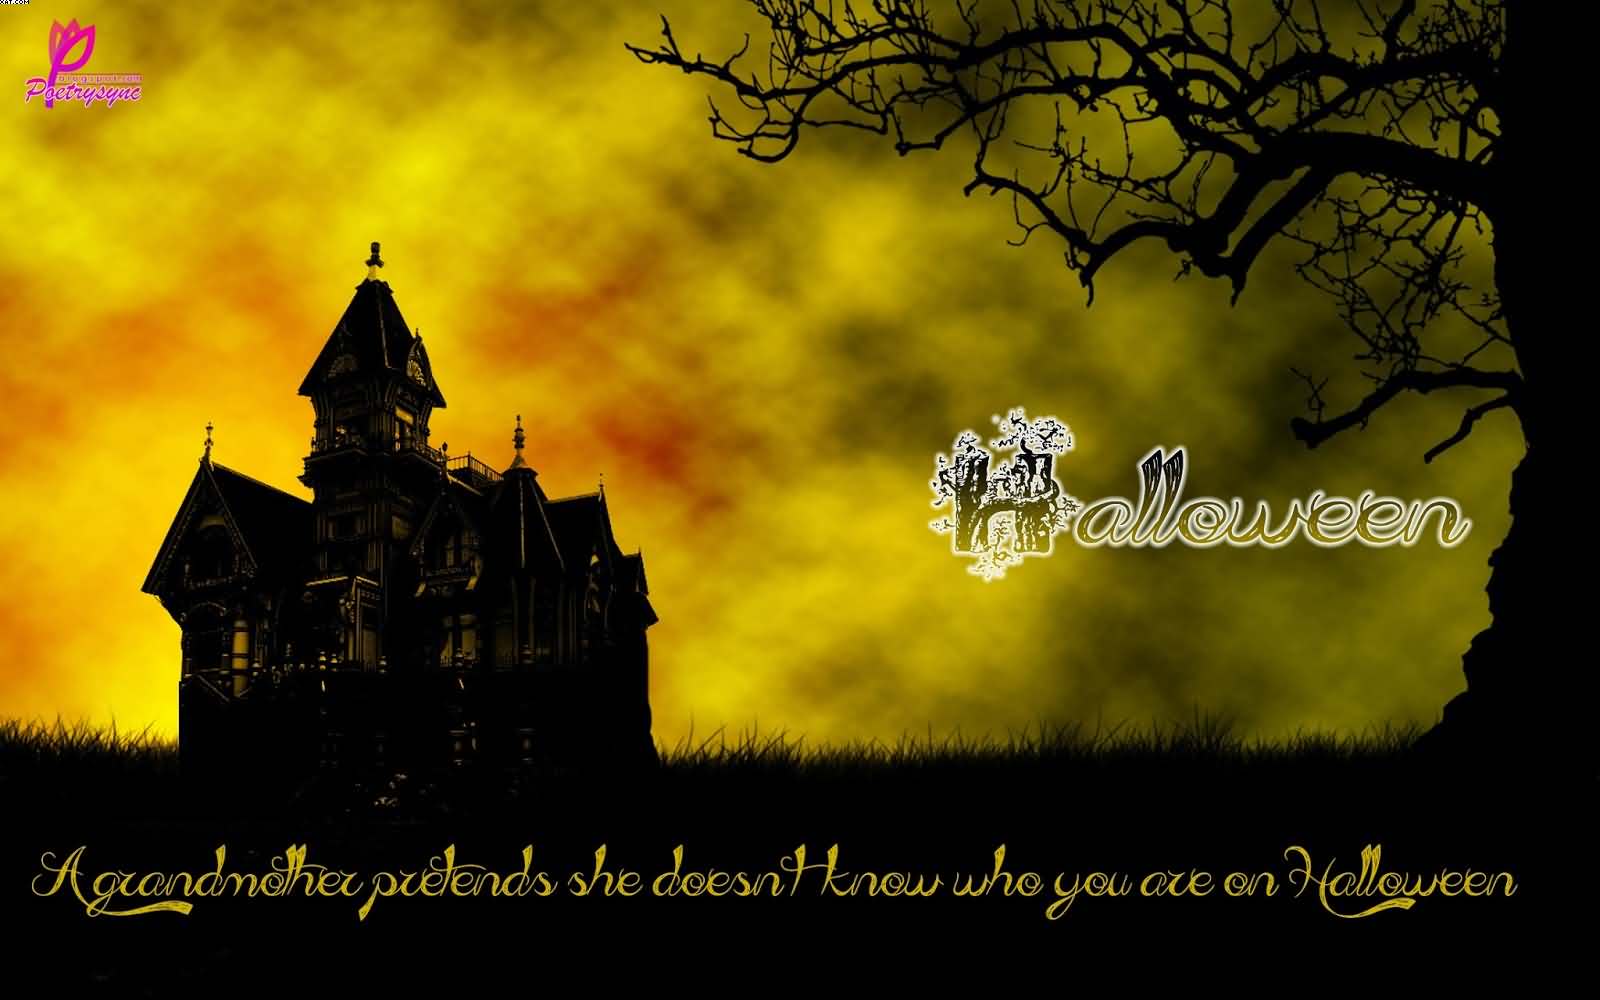 A grandmother pretends she doesn’t know who you are - Halloween wallpaper